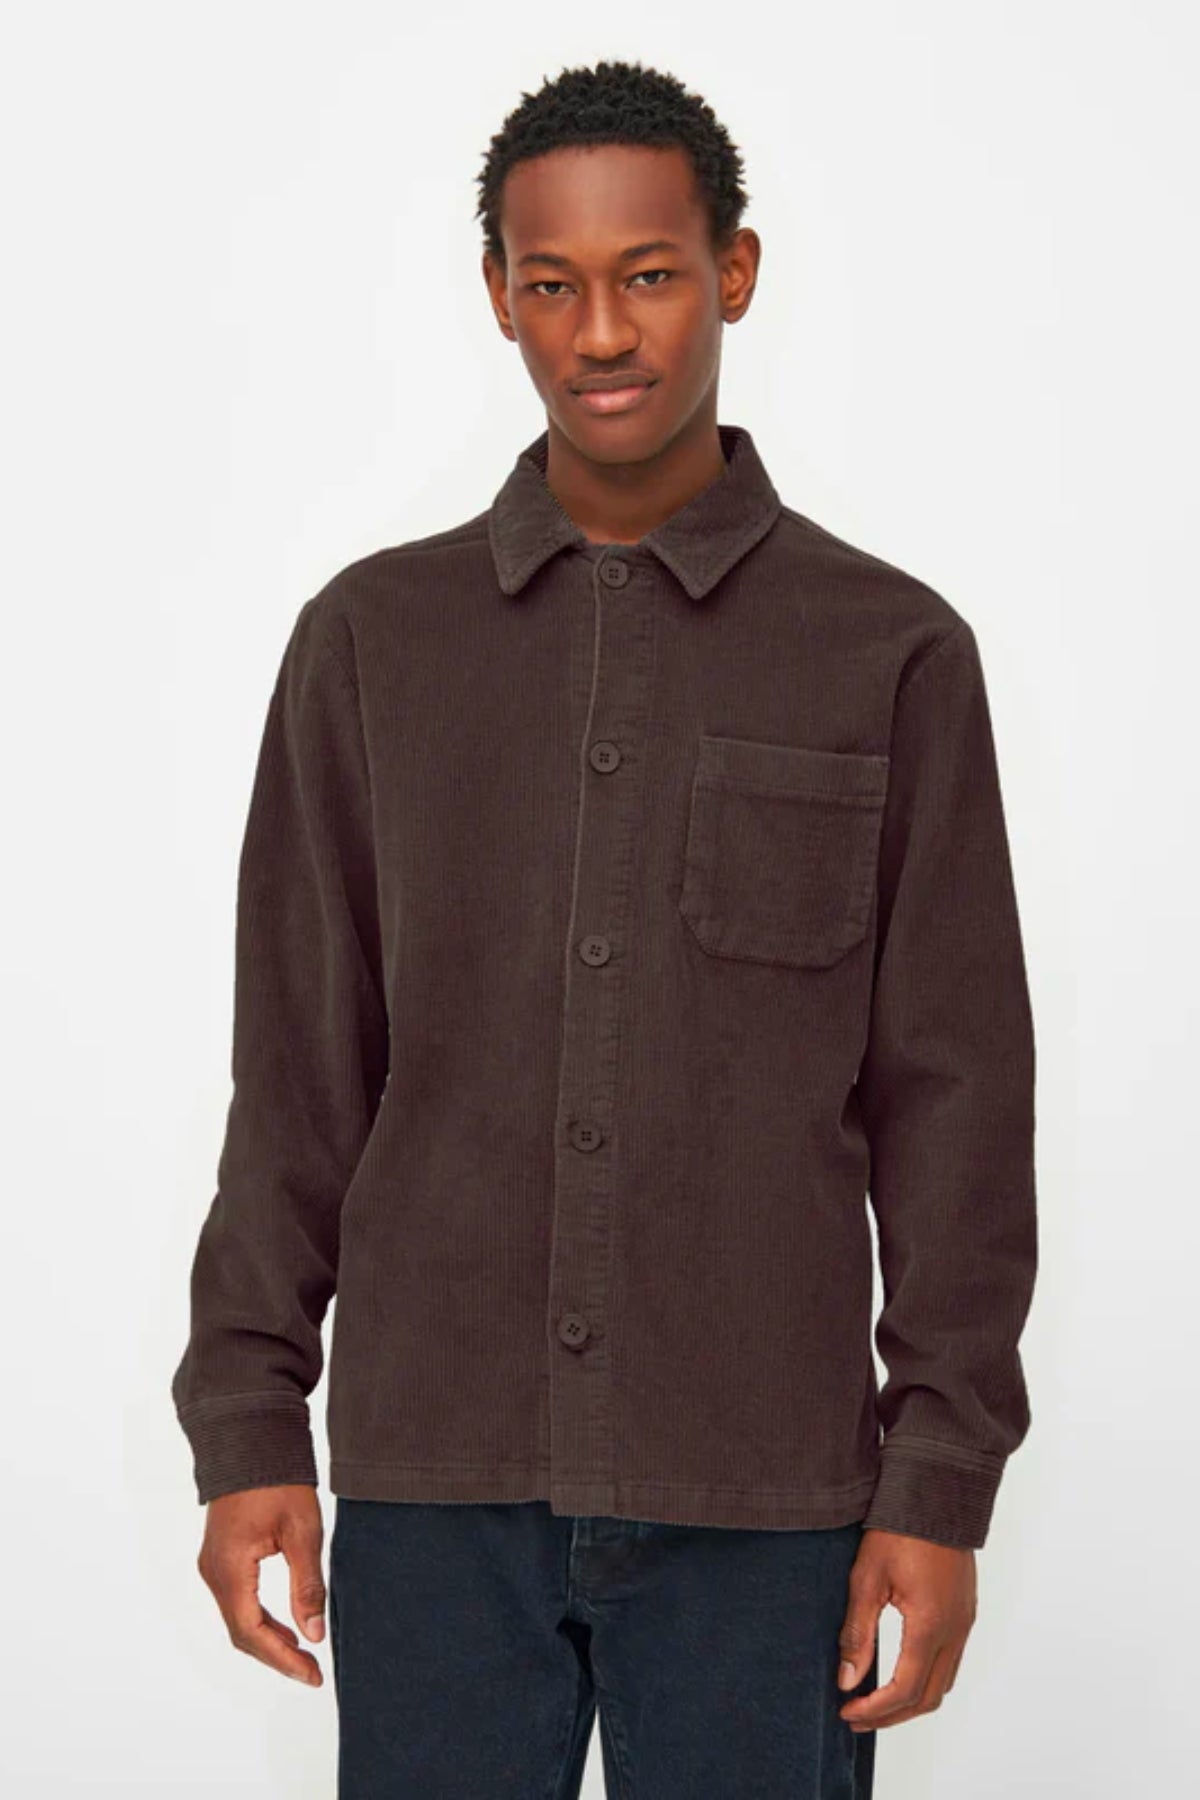 Chemise stretched 8-wales corduroy - Knowledge cotton apparel